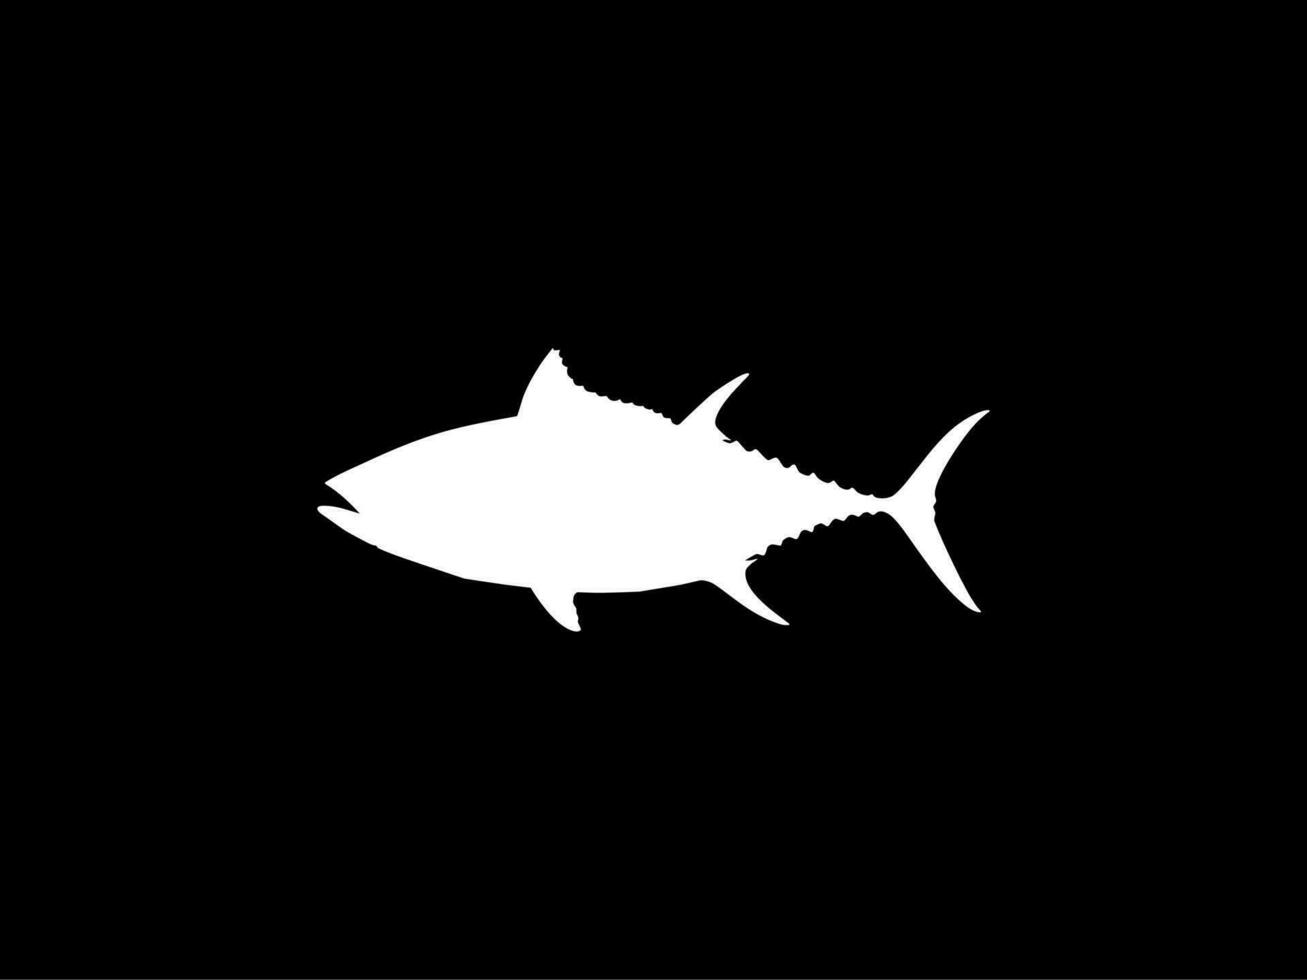 Flat Style Silhouette of the Tuna Fish, can use for Logo Type, Art Illustration, Pictogram, Website or Graphic Design Element. Vector Illustration